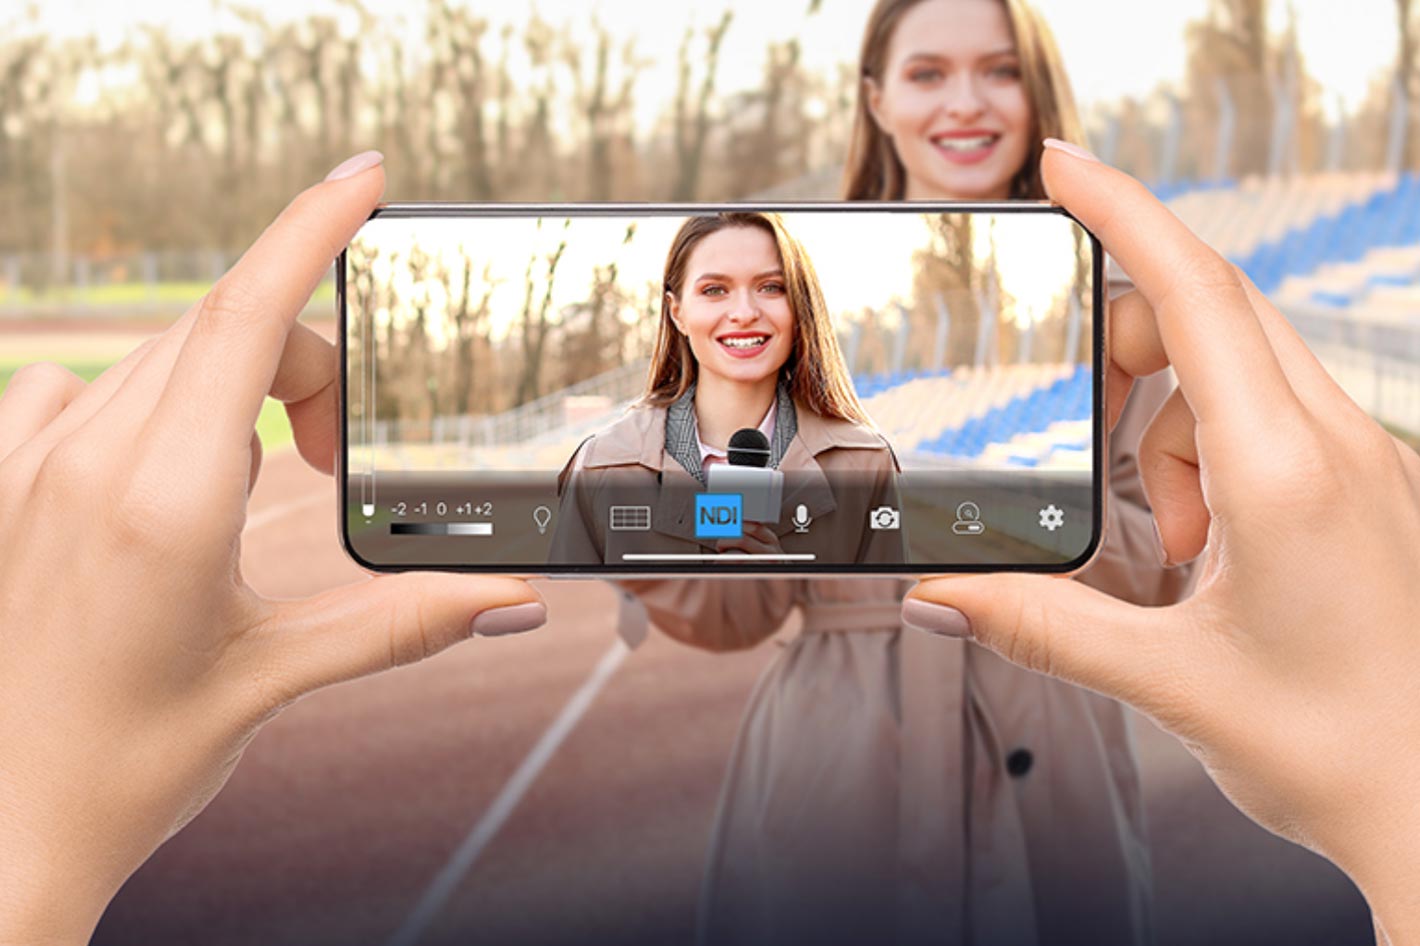 NDI|HX Camera for Android app now available